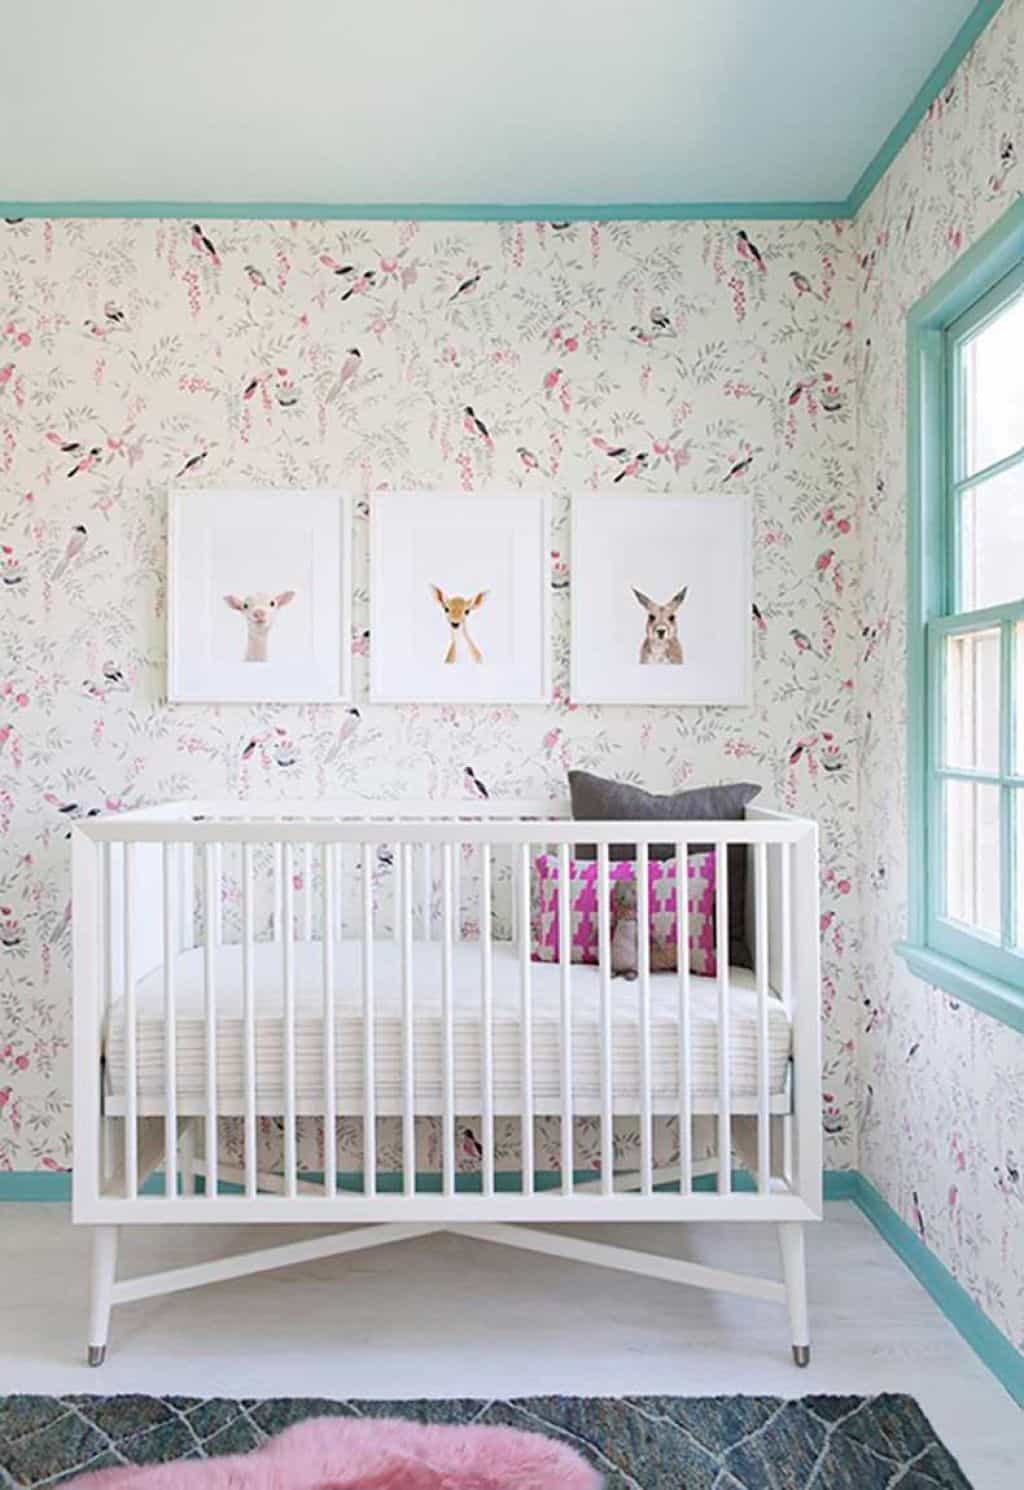 Baby Room With Nursery Wallpaper And White Crib 3 Pictures Above